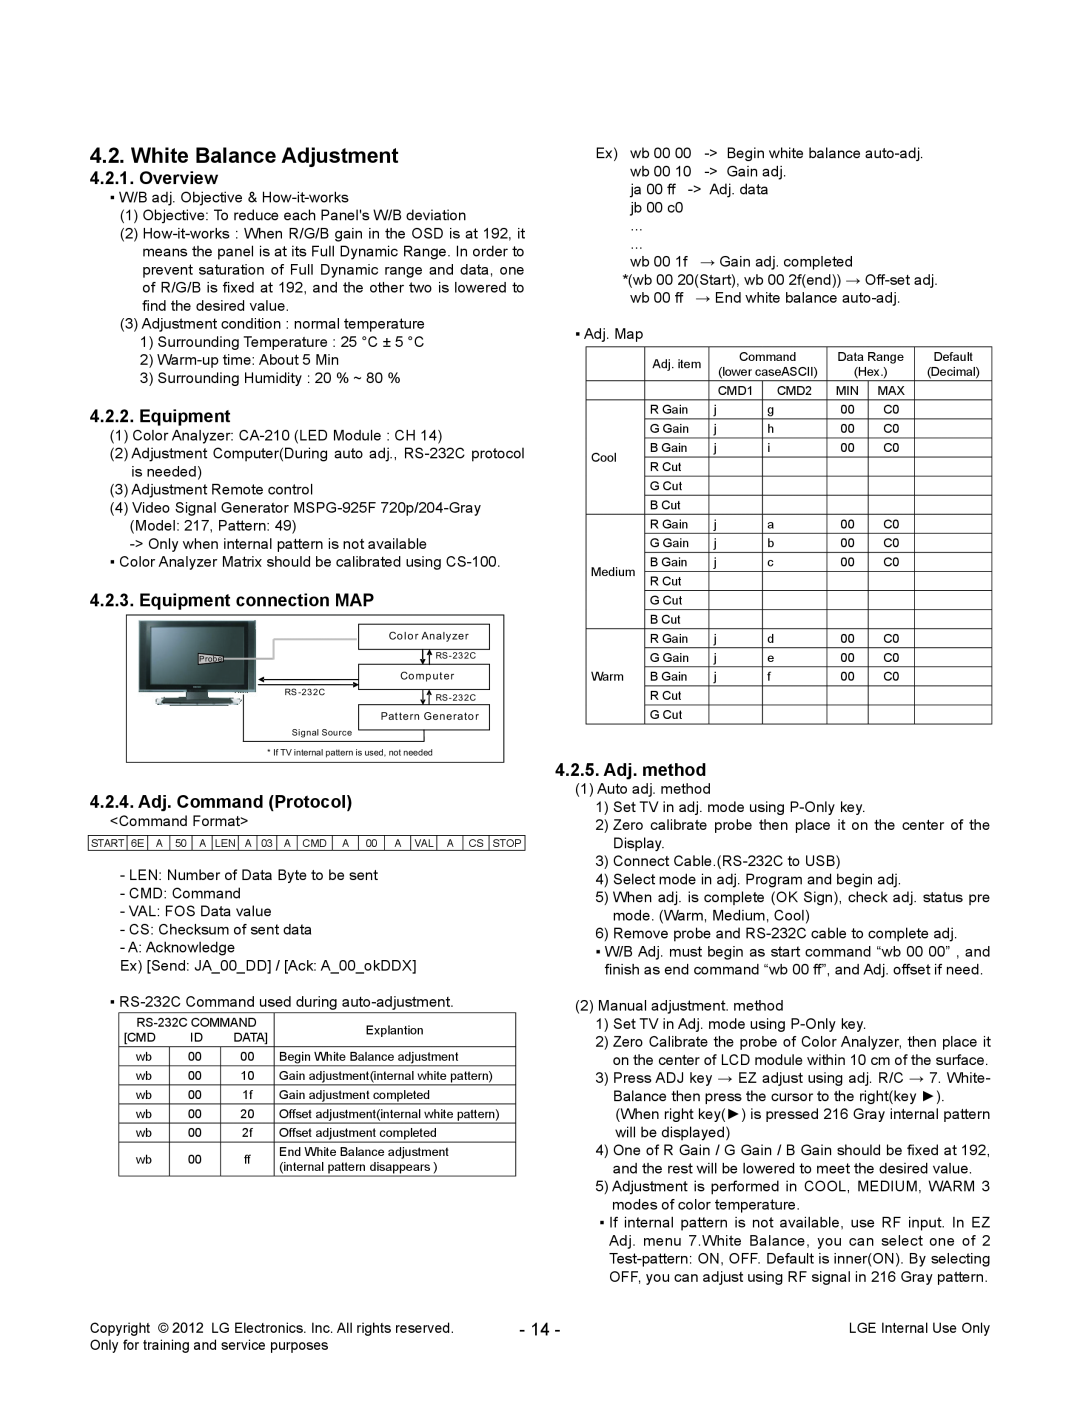 LG Electronics 47LM765S/765T White Balance Adjustment, Overview, Equipment connection MAP, Adj. Command Protocol 